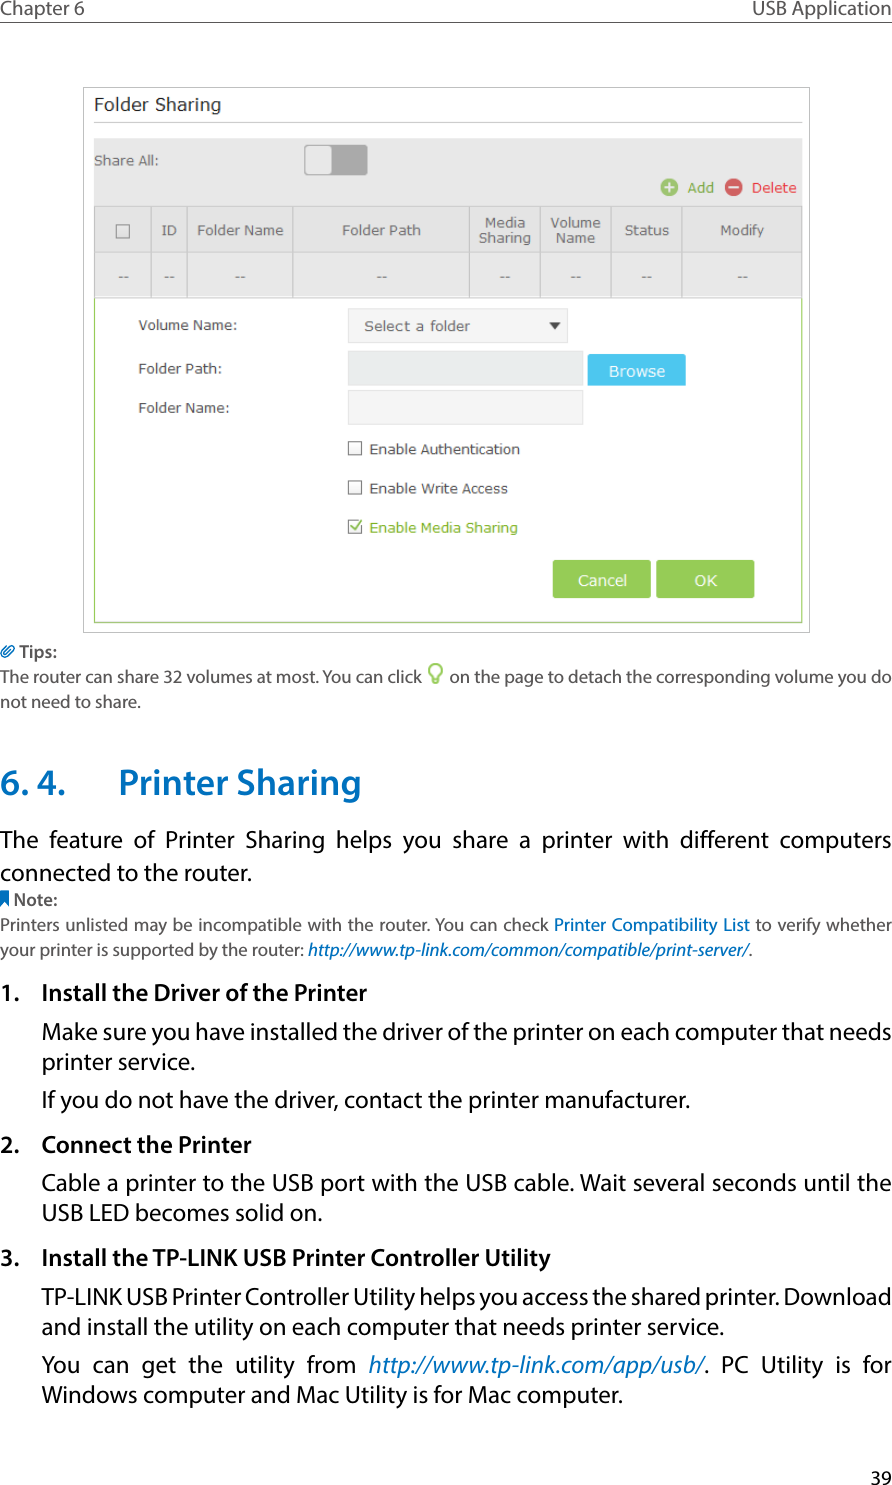 39Chapter 6 USB ApplicationTips:The router can share 32 volumes at most. You can click   on the page to detach the corresponding volume you do not need to share.6. 4.  Printer SharingThe feature of Printer Sharing helps you share a printer with different computers connected to the router.Note:Printers unlisted may be incompatible with the router. You can check Printer Compatibility List to verify whether your printer is supported by the router: http://www.tp-link.com/common/compatible/print-server/.1.  Install the Driver of the PrinterMake sure you have installed the driver of the printer on each computer that needs printer service.If you do not have the driver, contact the printer manufacturer.2.  Connect the PrinterCable a printer to the USB port with the USB cable. Wait several seconds until the USB LED becomes solid on.3.  Install the TP-LINK USB Printer Controller UtilityTP-LINK USB Printer Controller Utility helps you access the shared printer. Download and install the utility on each computer that needs printer service.You can get the utility from http://www.tp-link.com/app/usb/. PC Utility is for Windows computer and Mac Utility is for Mac computer.